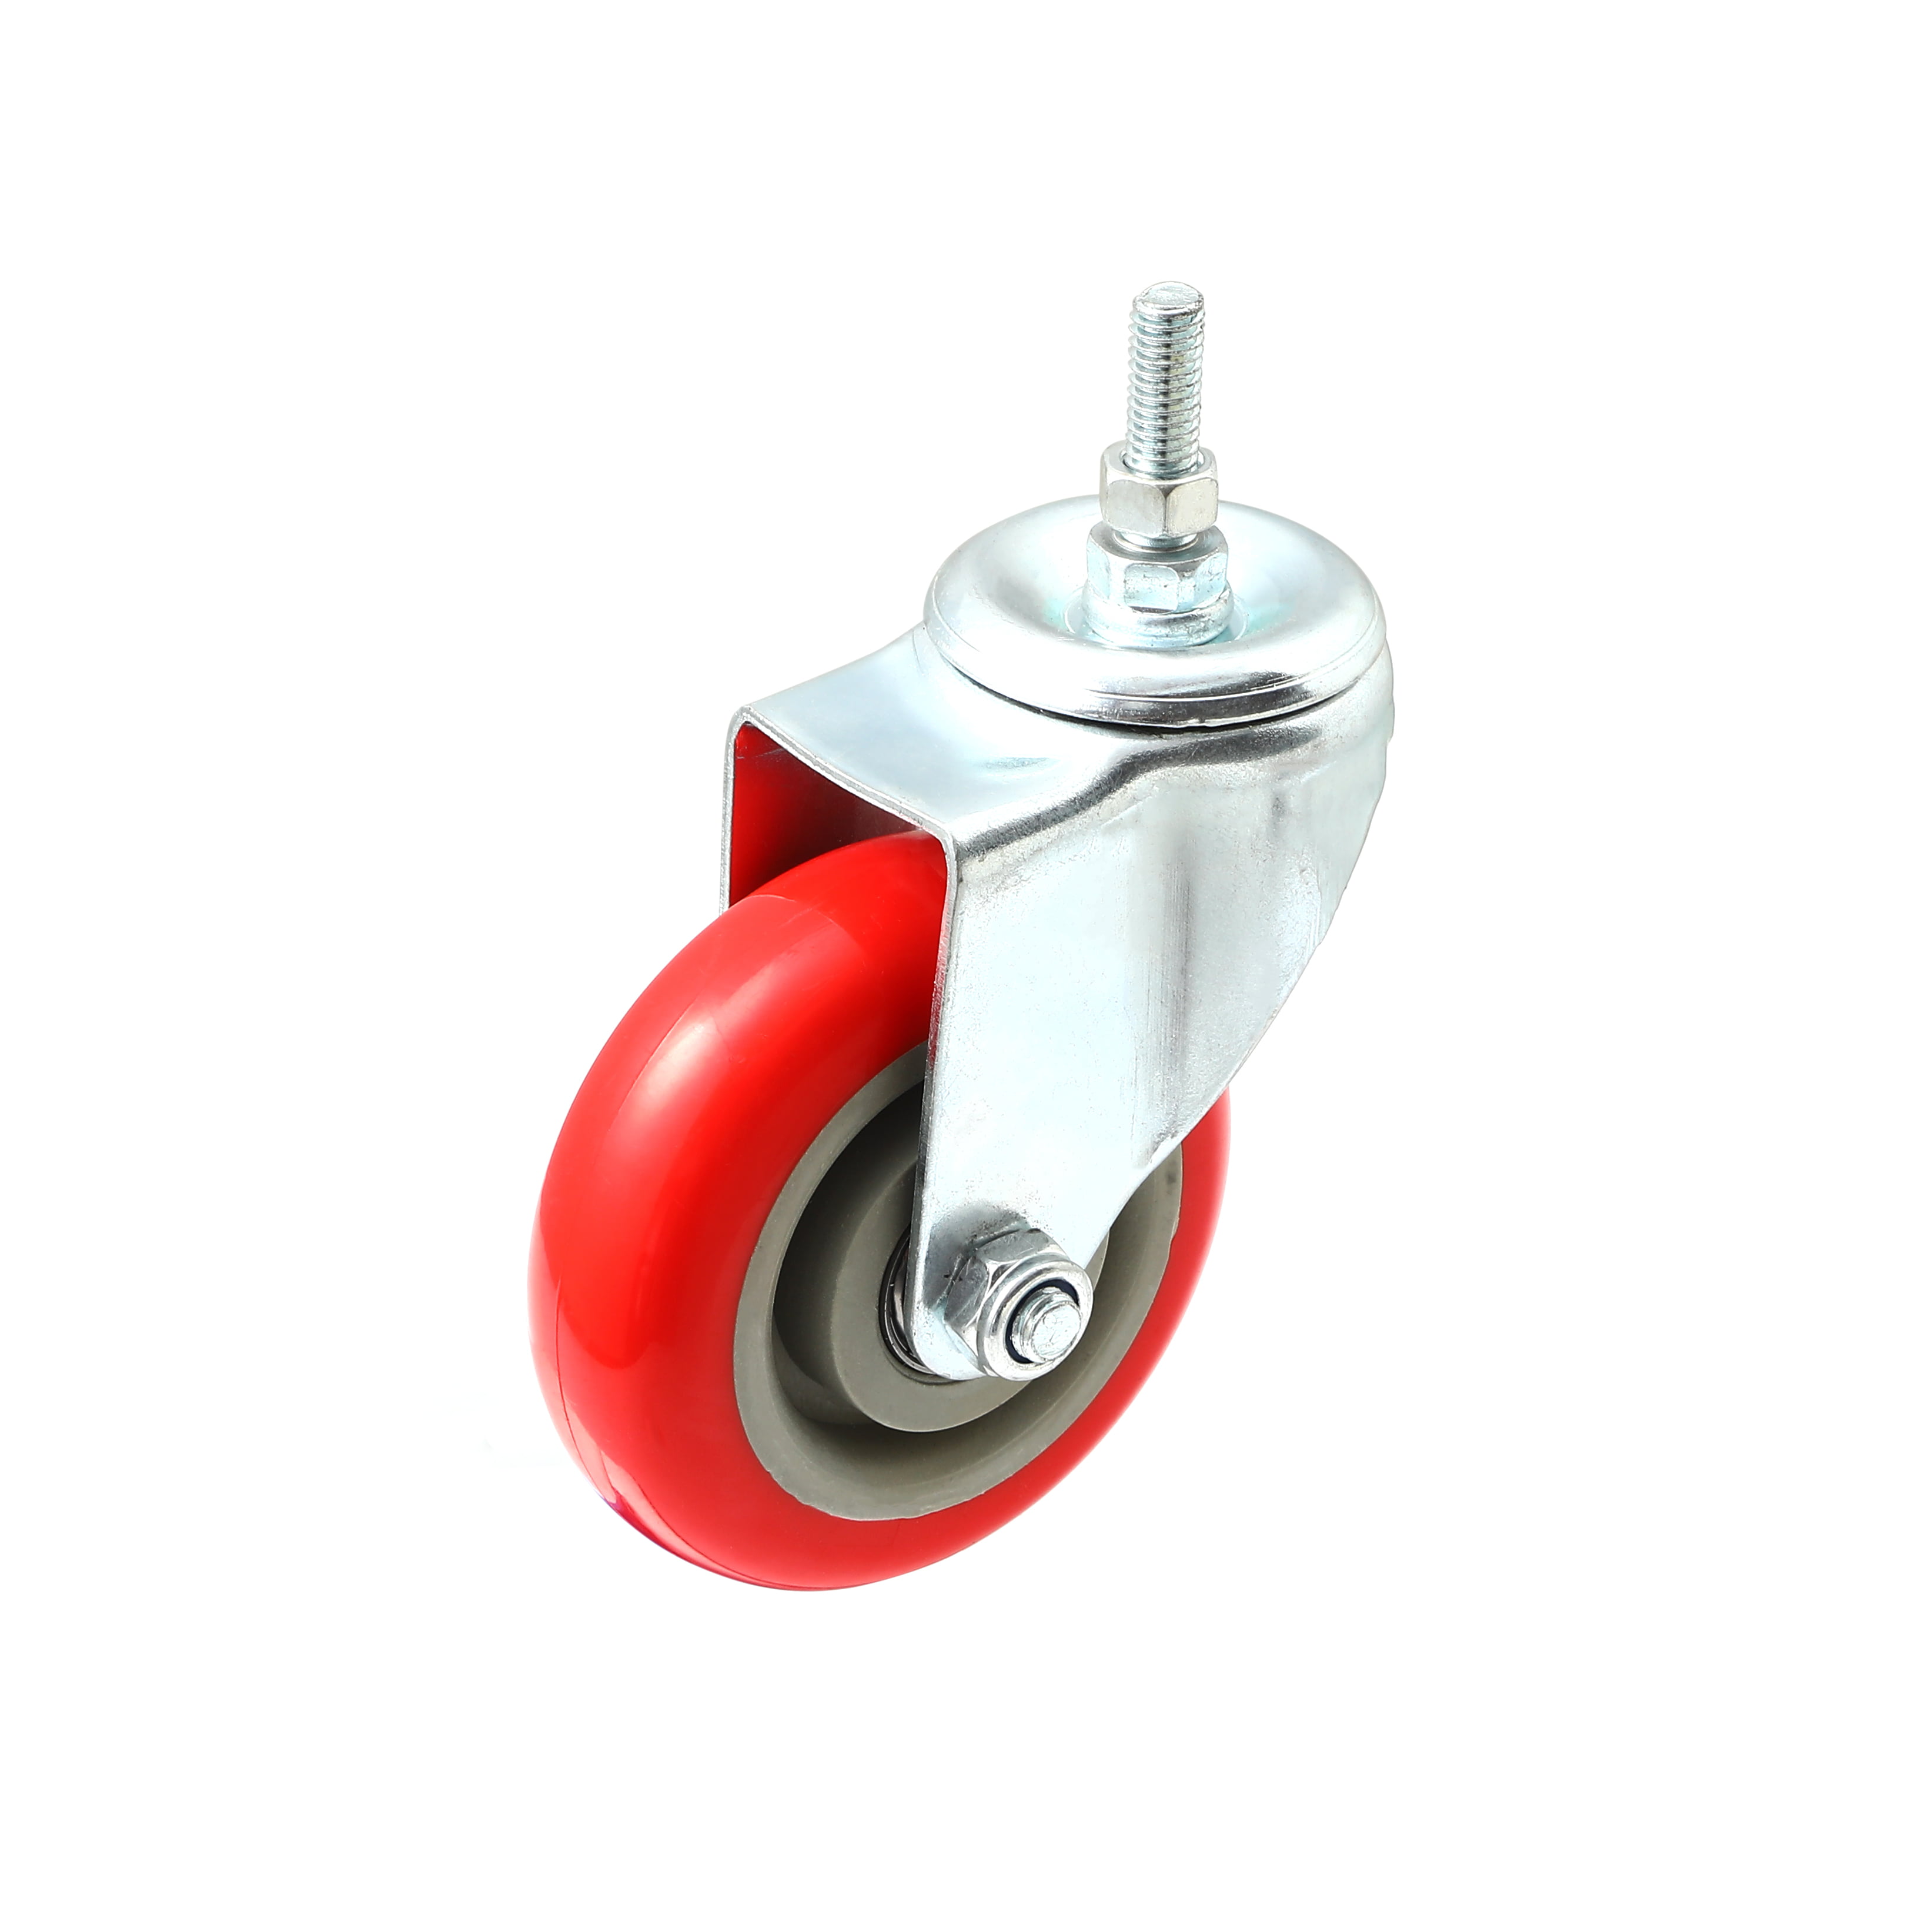 Lot of 8 3 Inch Stem Caster Wheels Swivel Plate on Red Polyurethane 